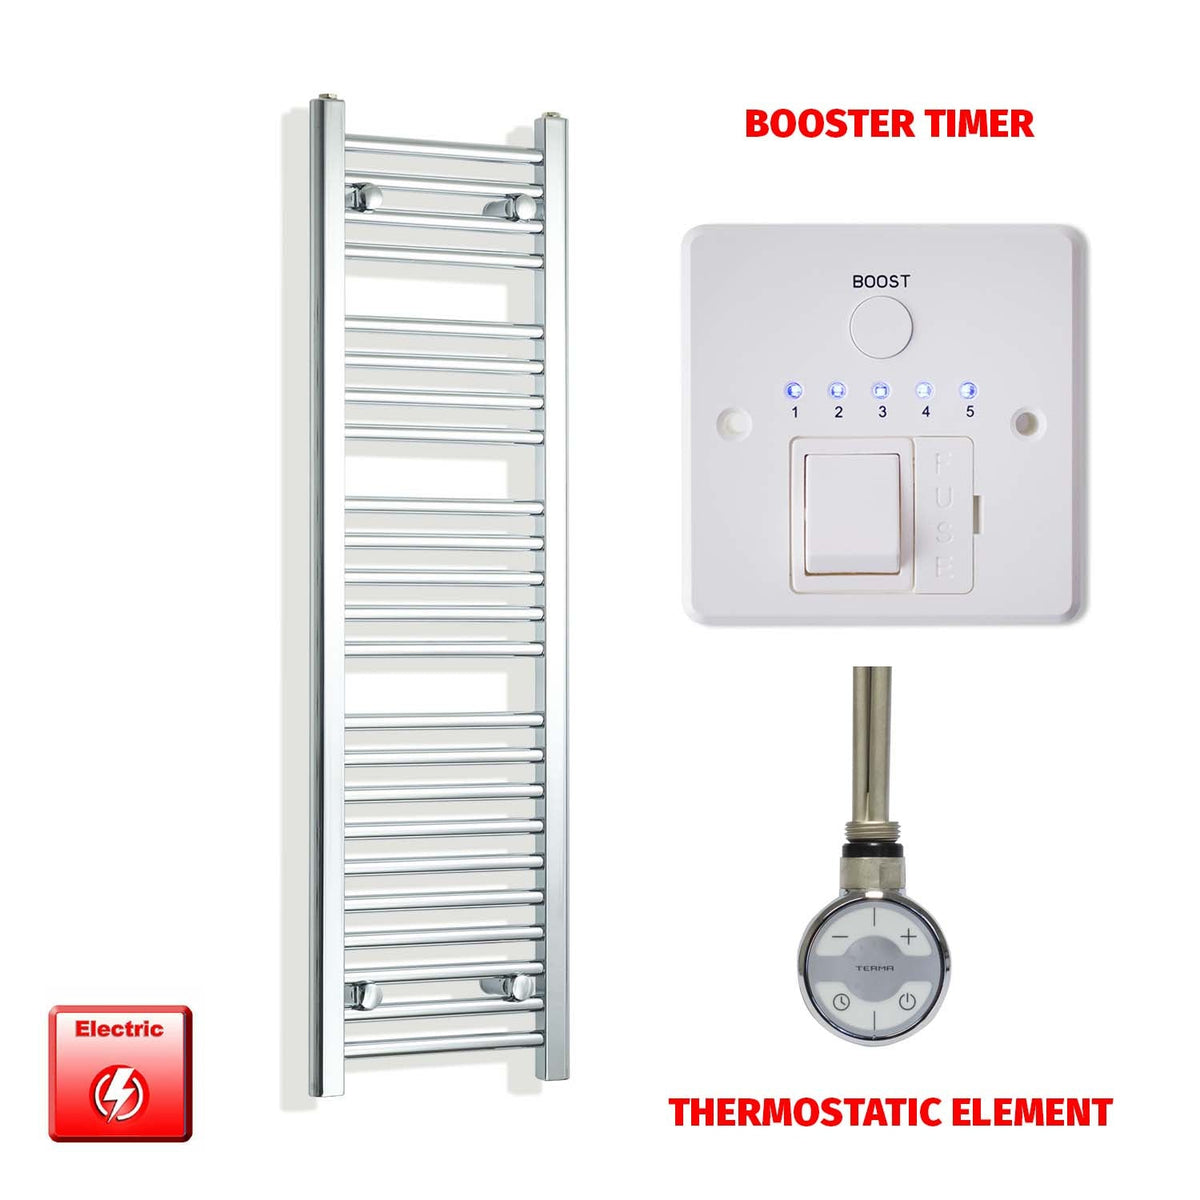 1200mm High 300mm Wide Pre-Filled Electric Heated Towel Rail Radiator Straight Chrome MOA Booster Timer